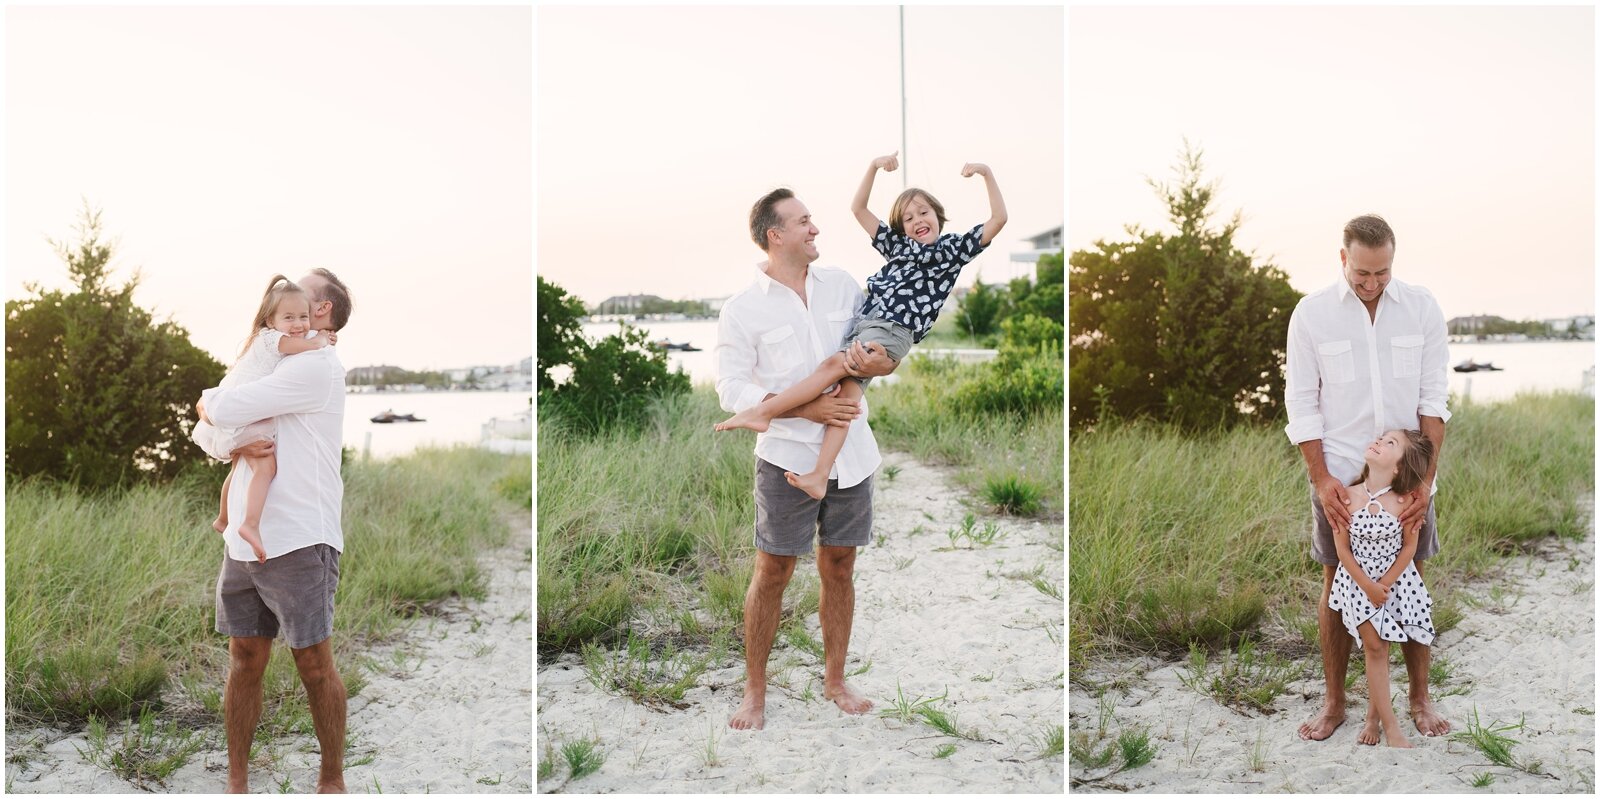  Father son, Father daughter family photos at the beach   